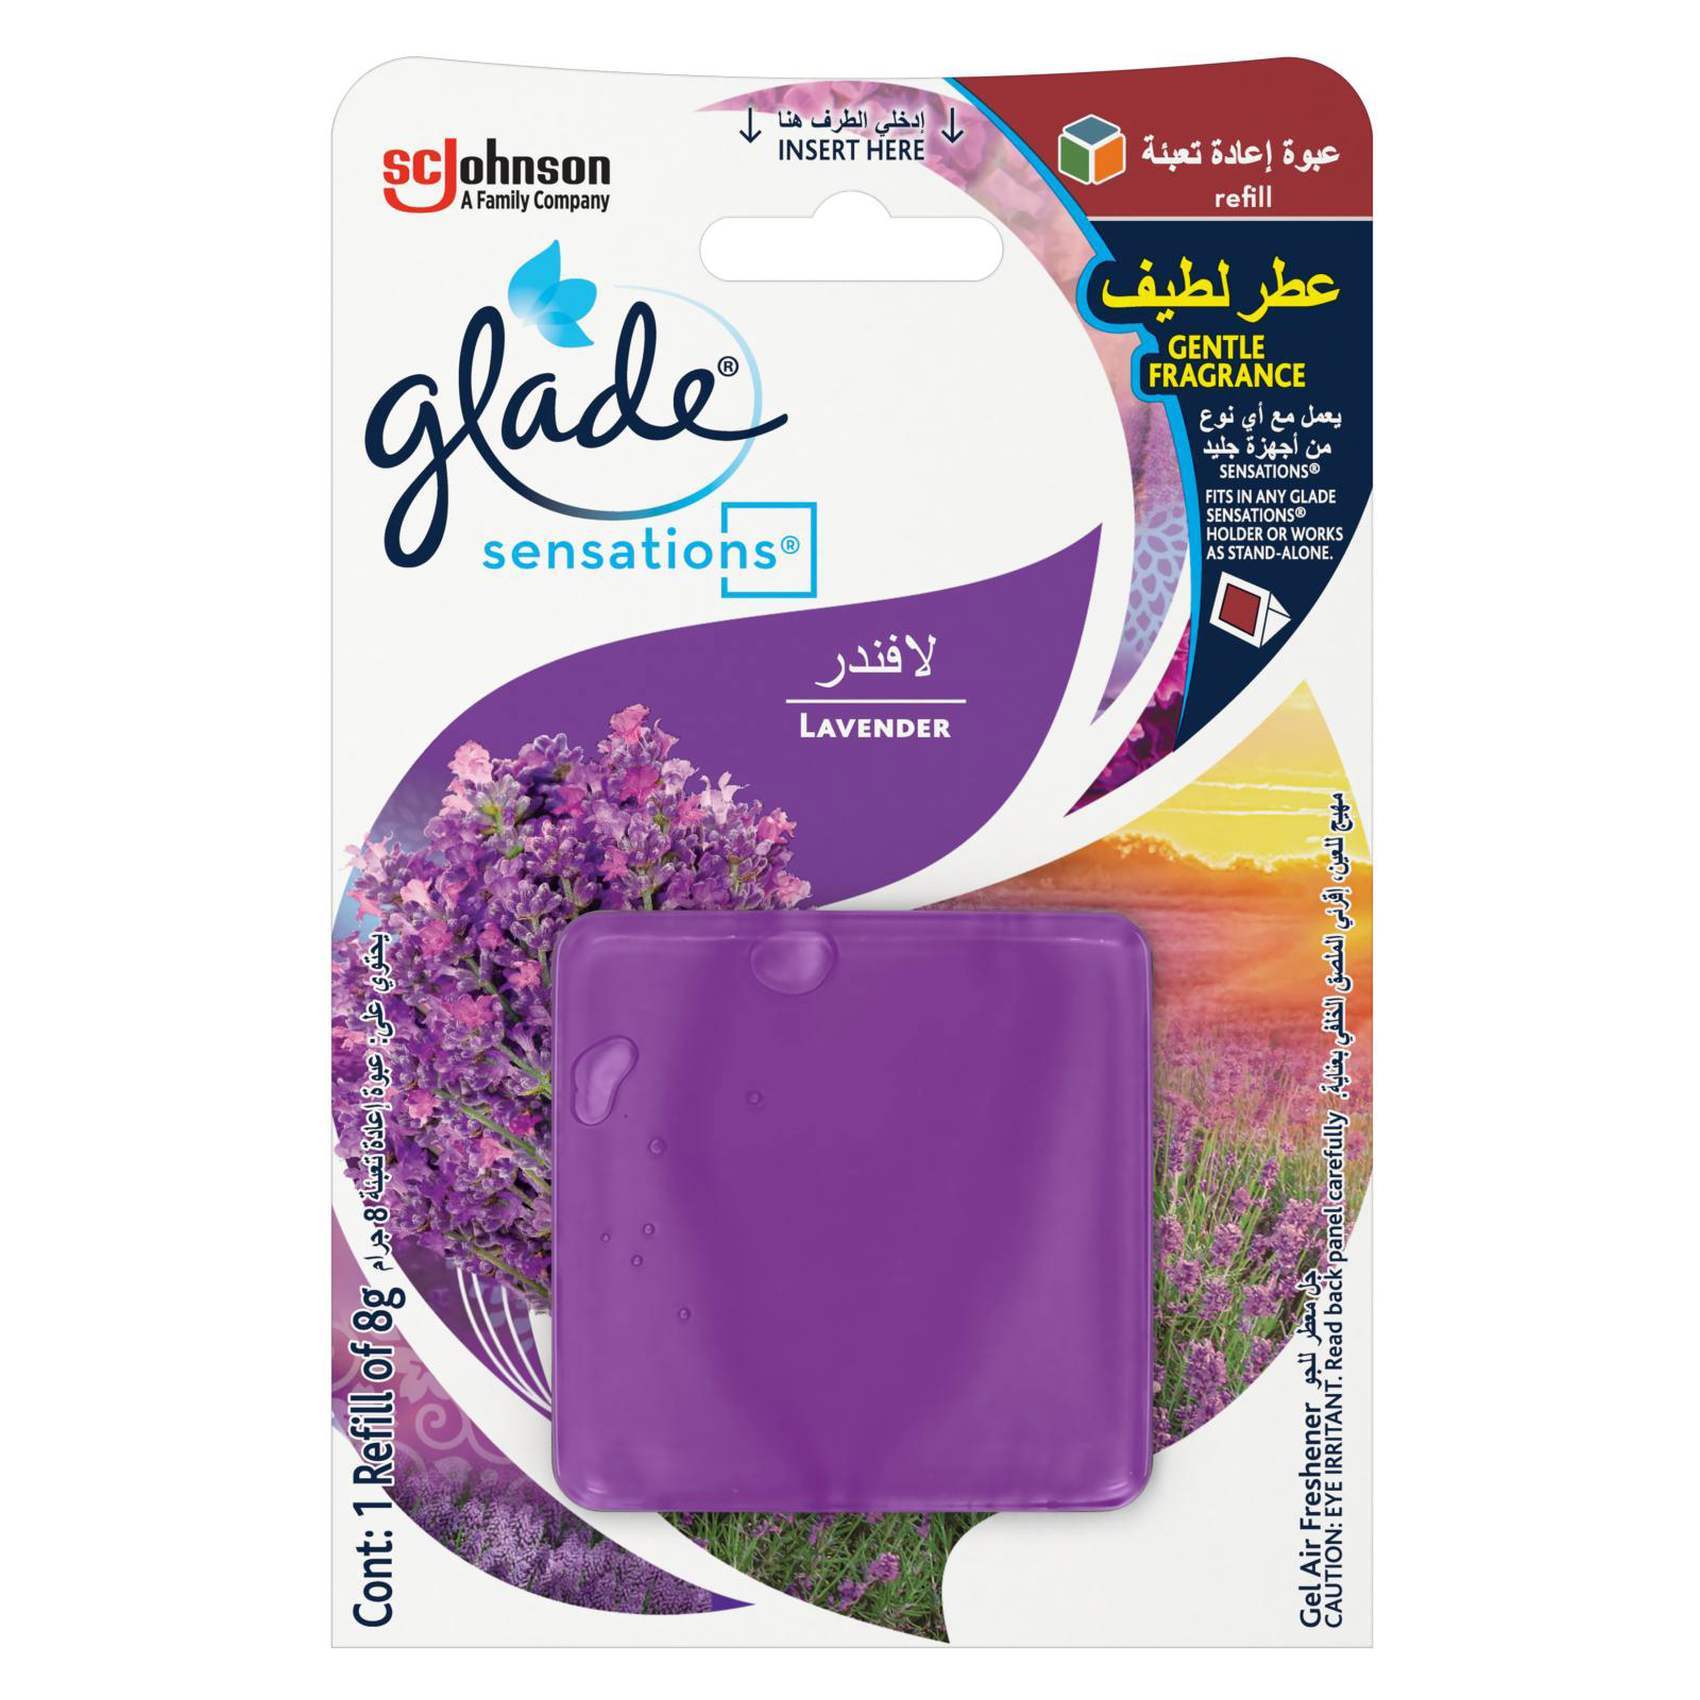 Glade by Brise Lavender and Jasmine sense and spray refill Order Online